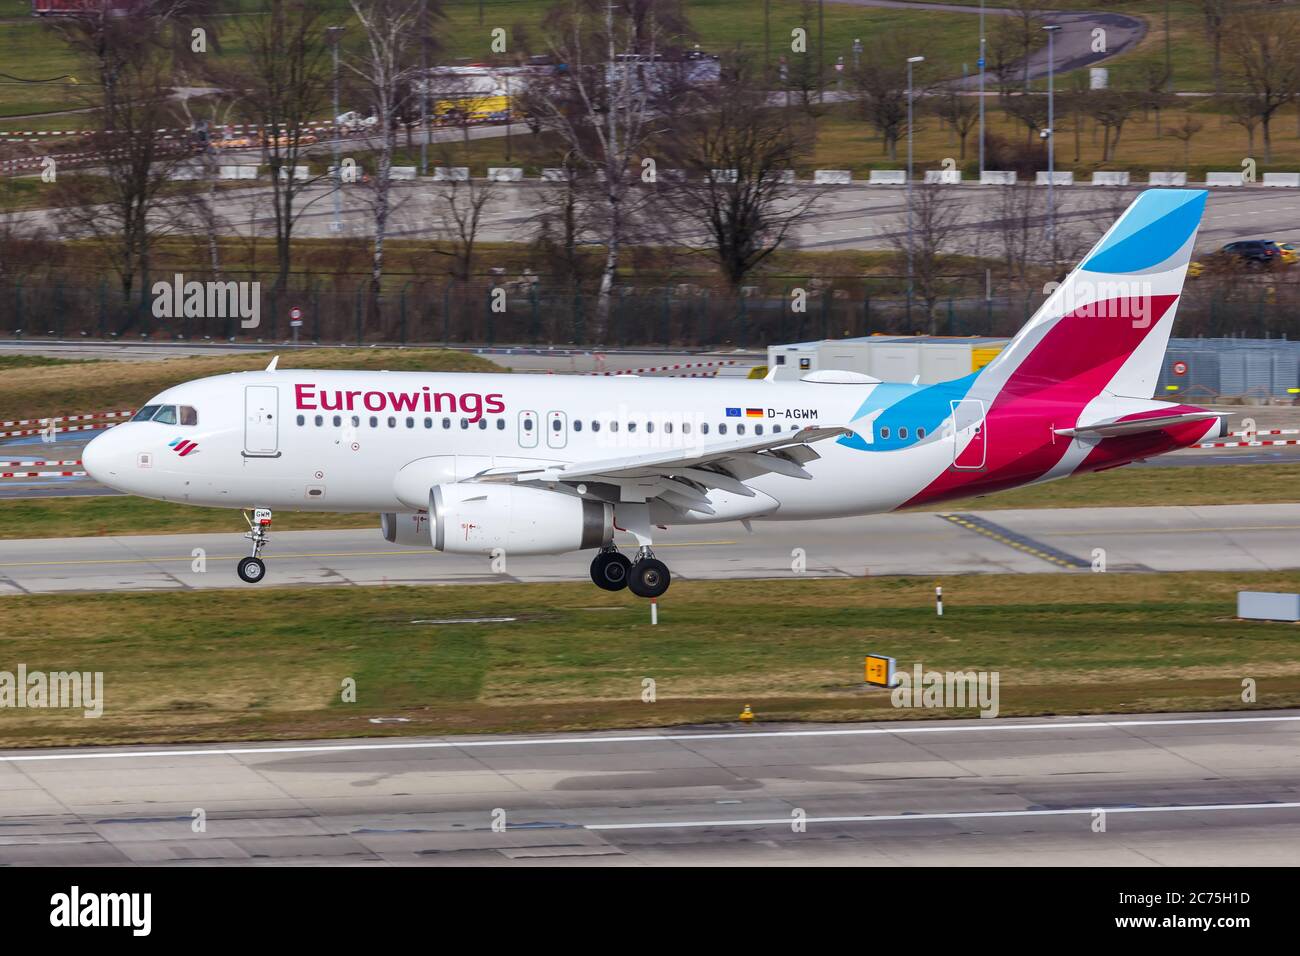 Zurich, Switzerland - February 10, 2020: Eurowings Airbus A319 airplane at Zurich airport (ZRH) in Switzerland. Airbus is a European aircraft manufact Stock Photo